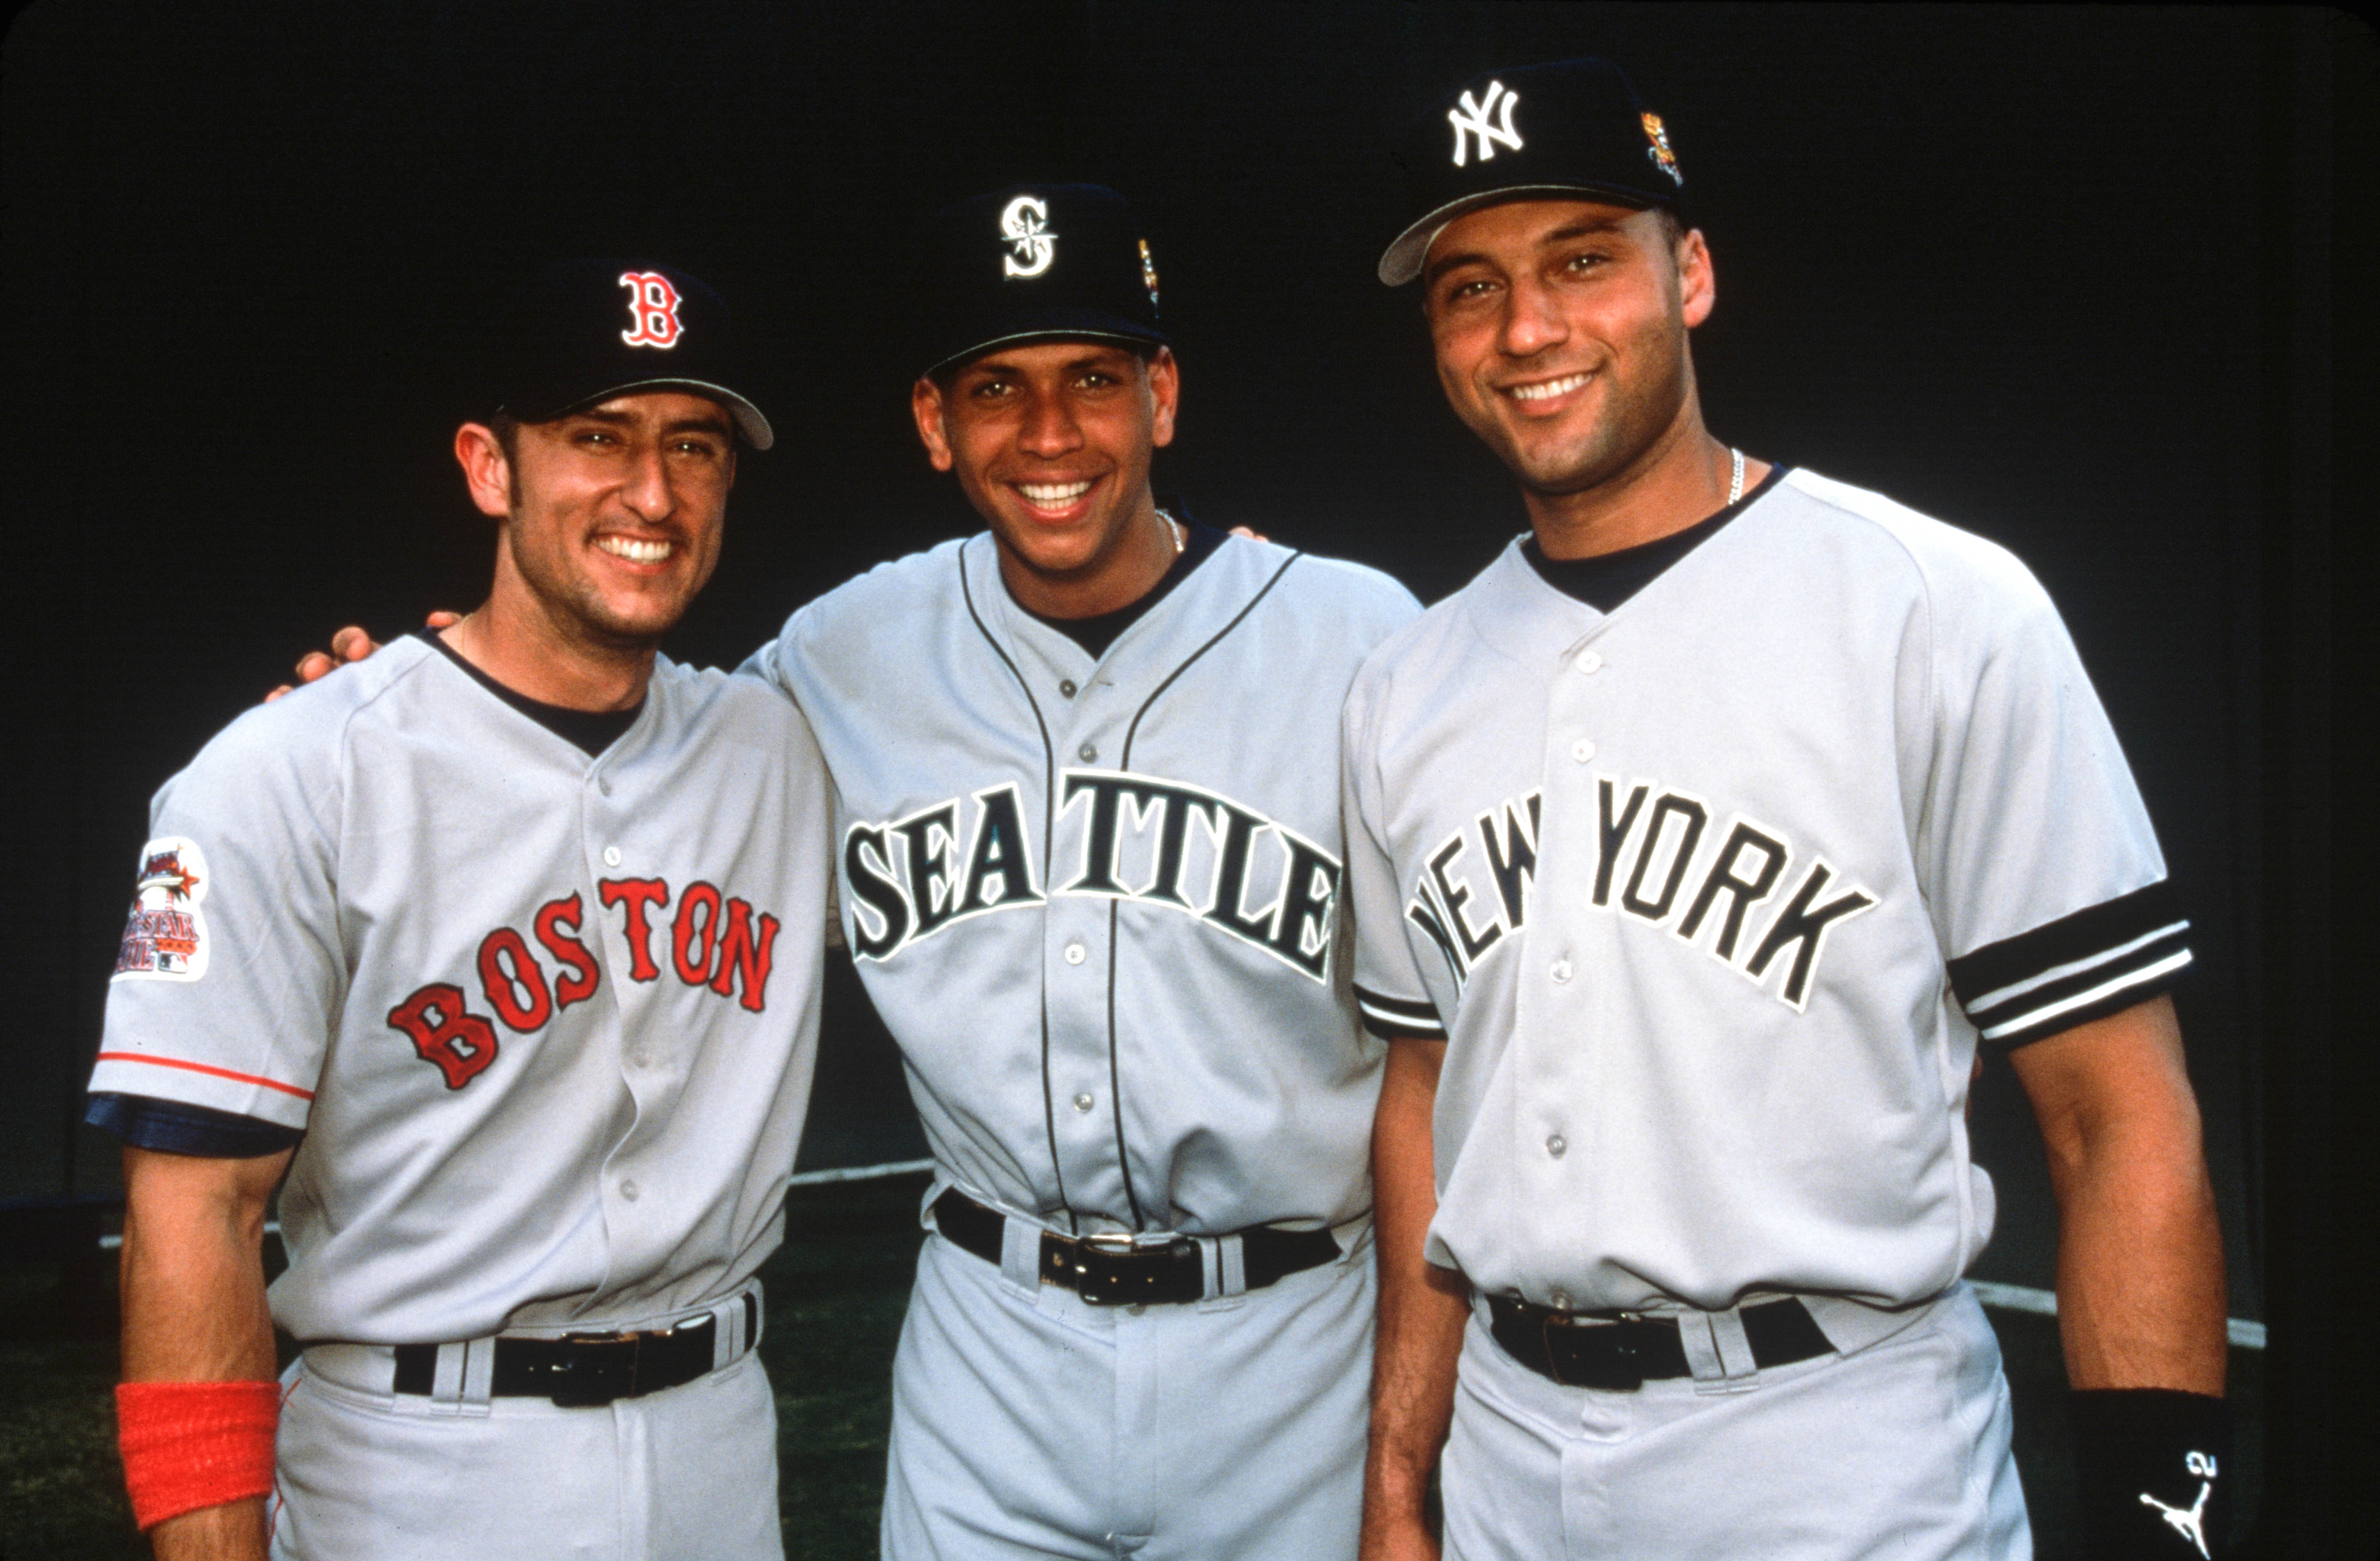 Nomar Garciaparra, Alex Rodriguez and Derek Jeter pose for a photo before the 71st MLB All-Star Game at Turner Field on Tuesday, July 11, 2000